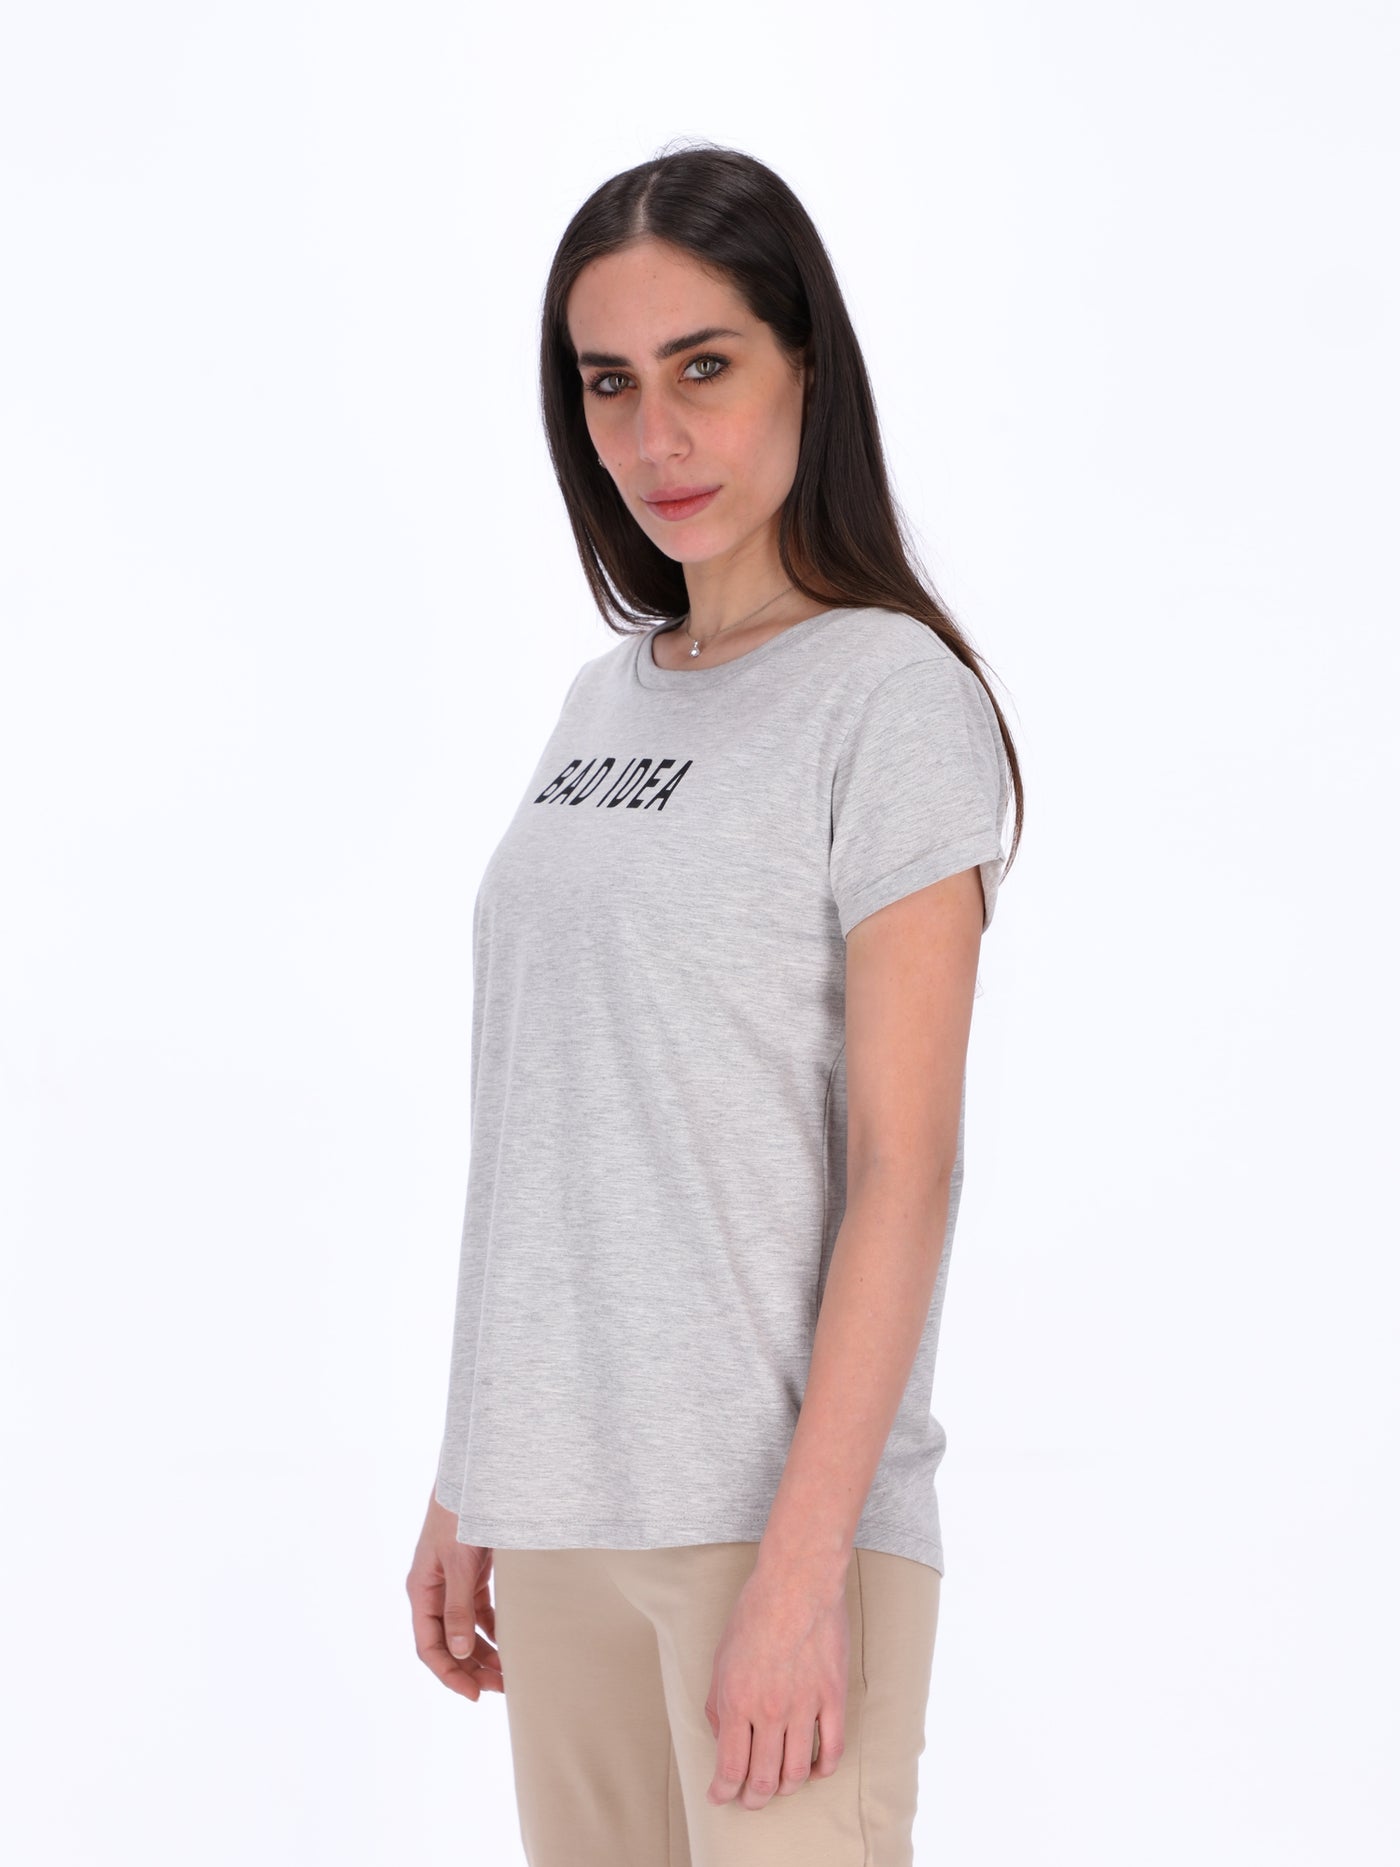 OR Women's Front Print T-Shirt